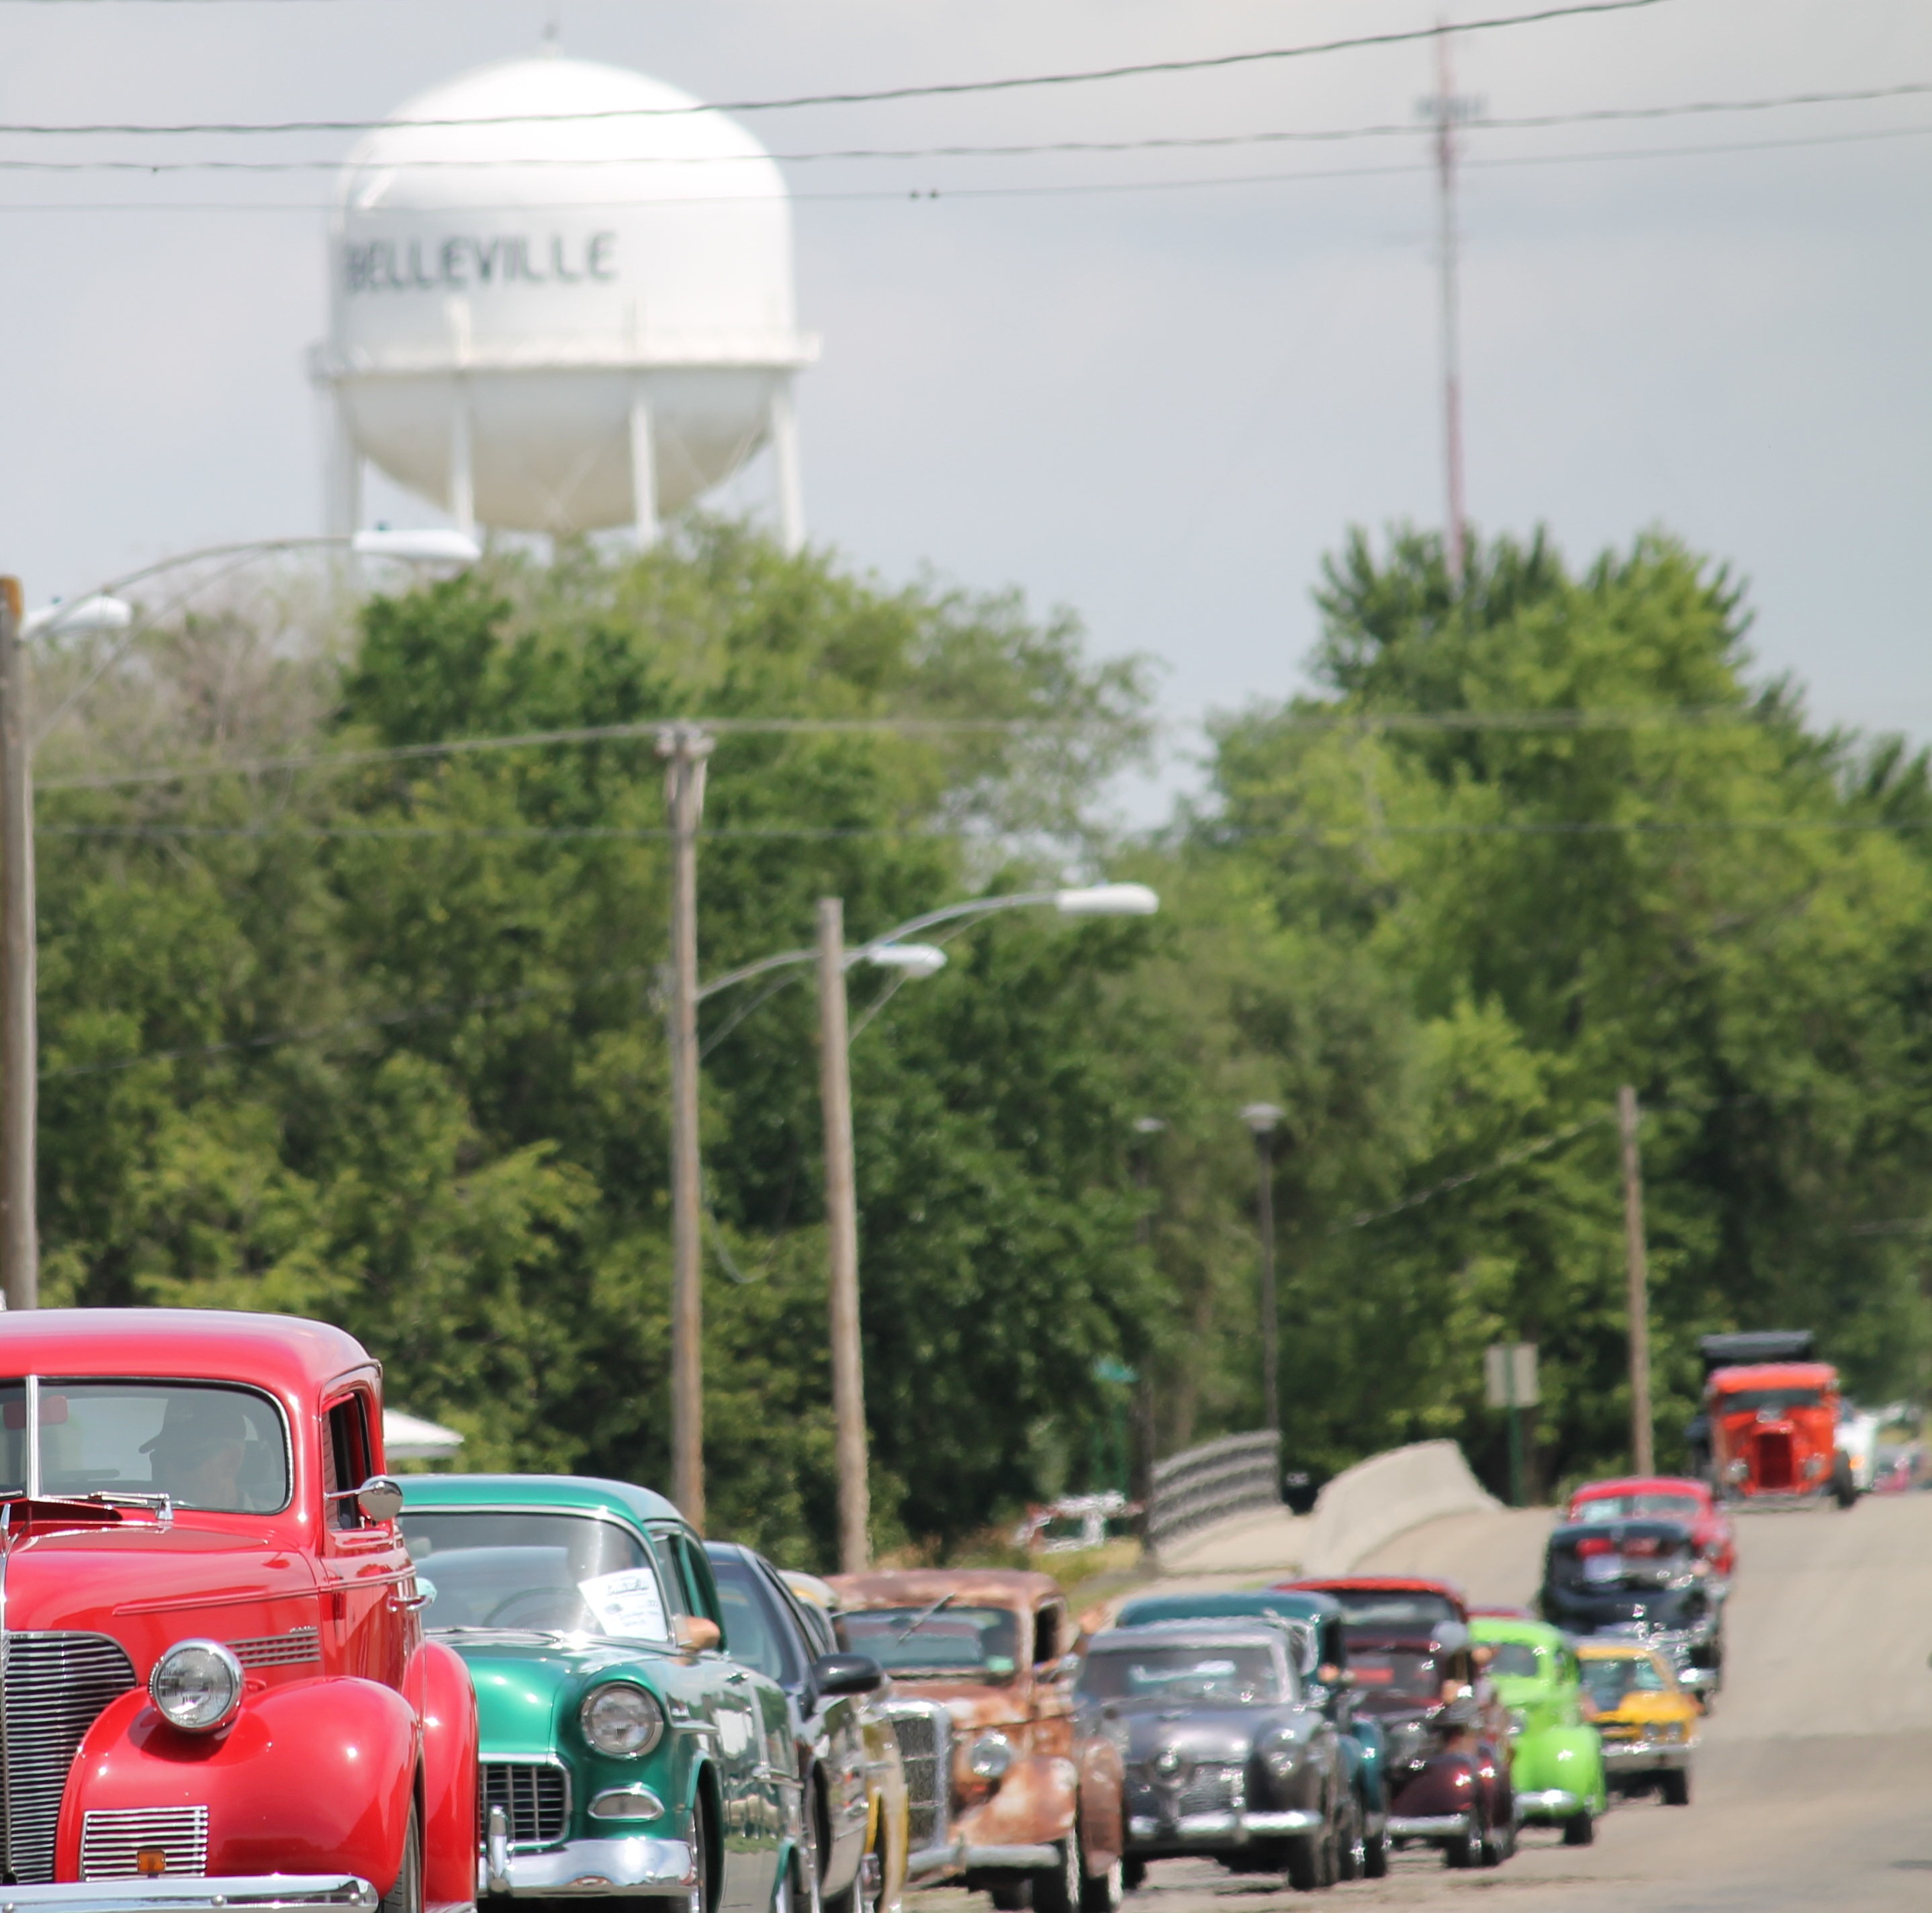 Belleville, KS Cruise-in at the Crossroads